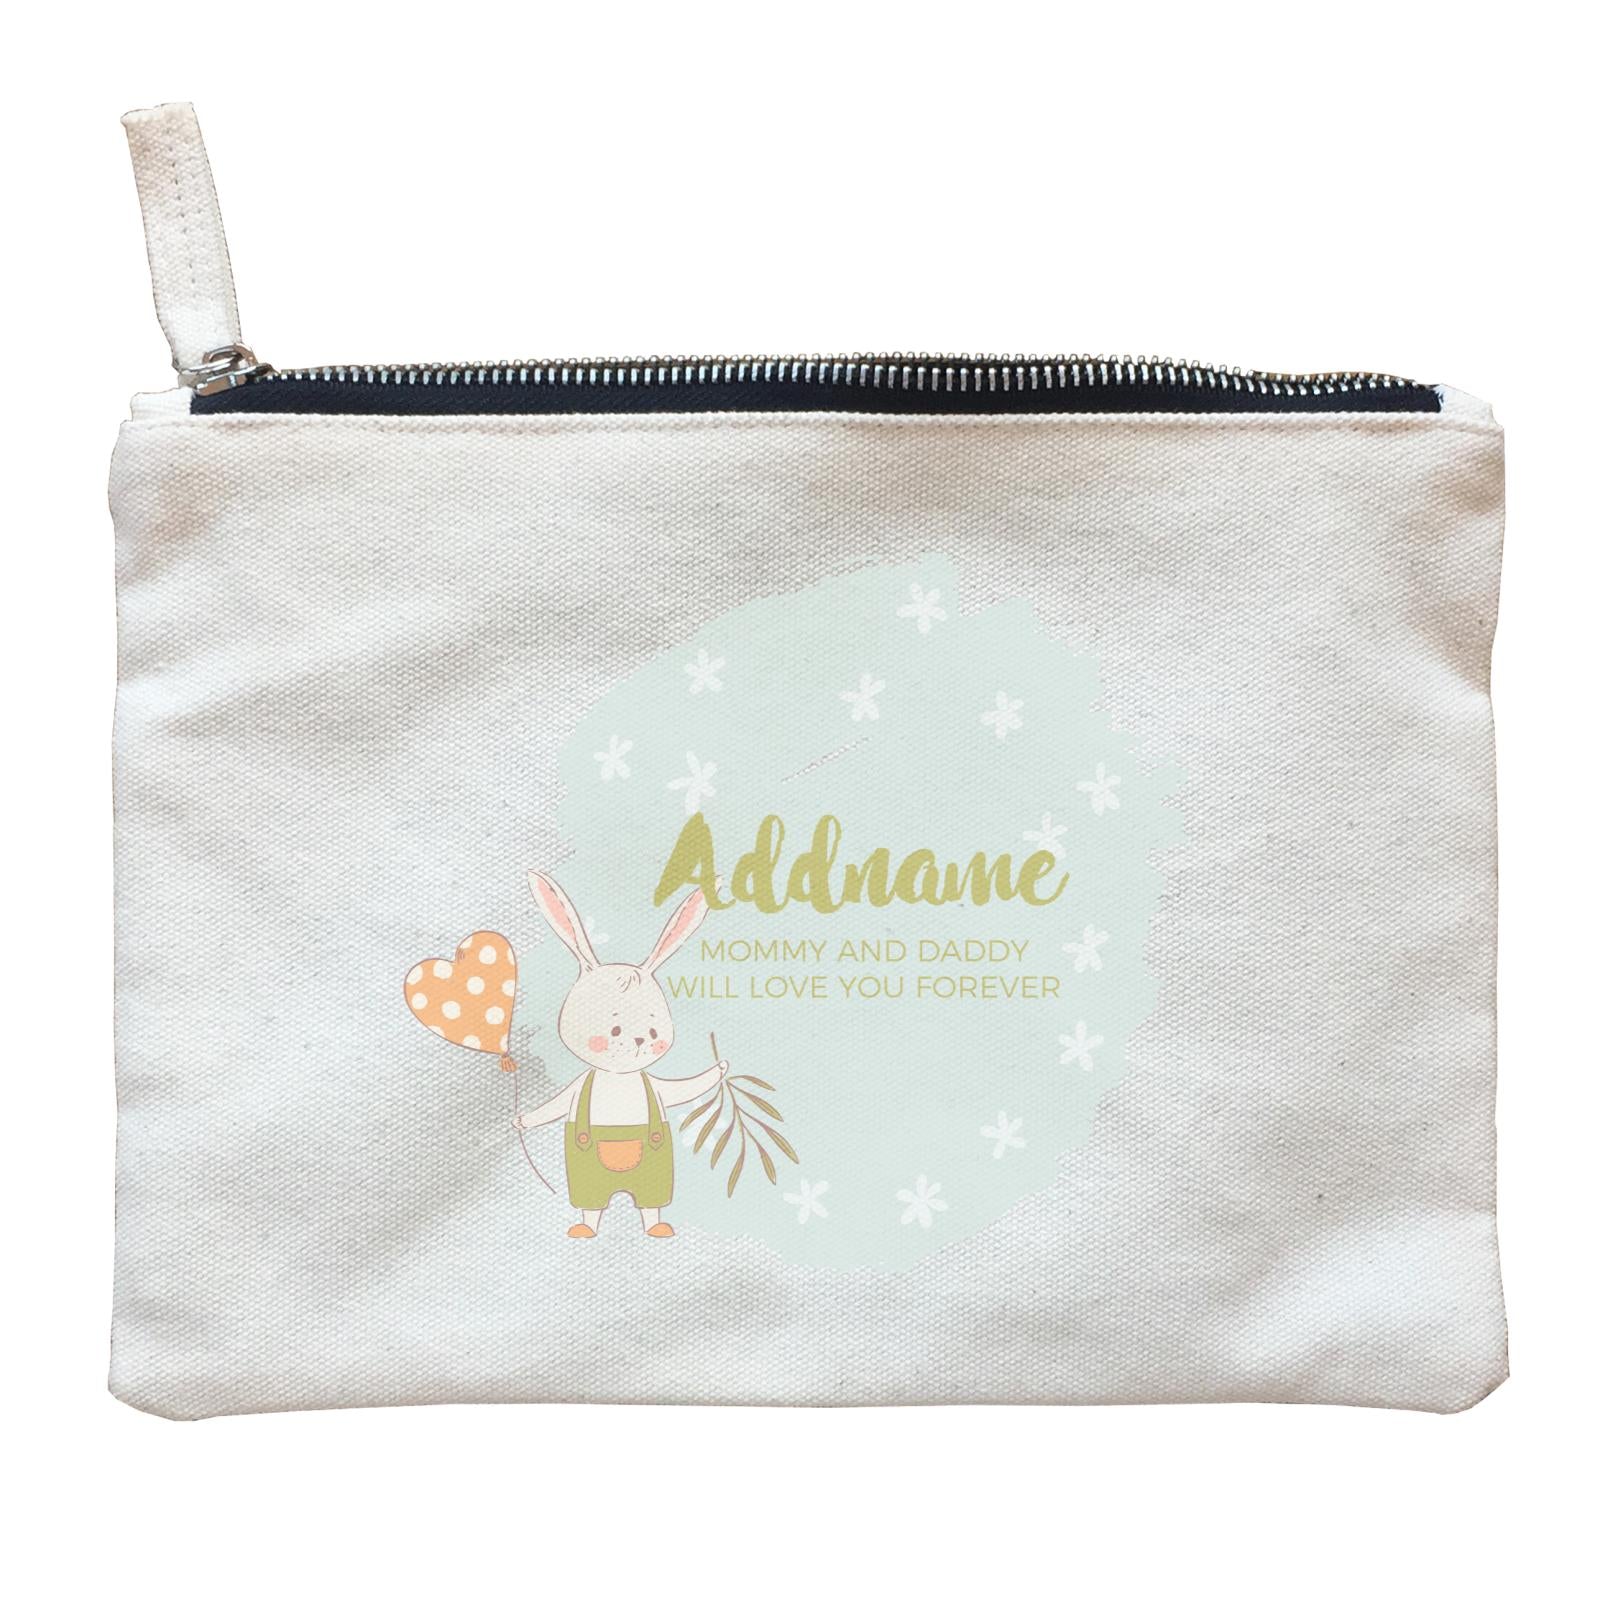 Cute Boy Rabbit with Heart Balloon Personalizable with Name and Text Zipper Pouch